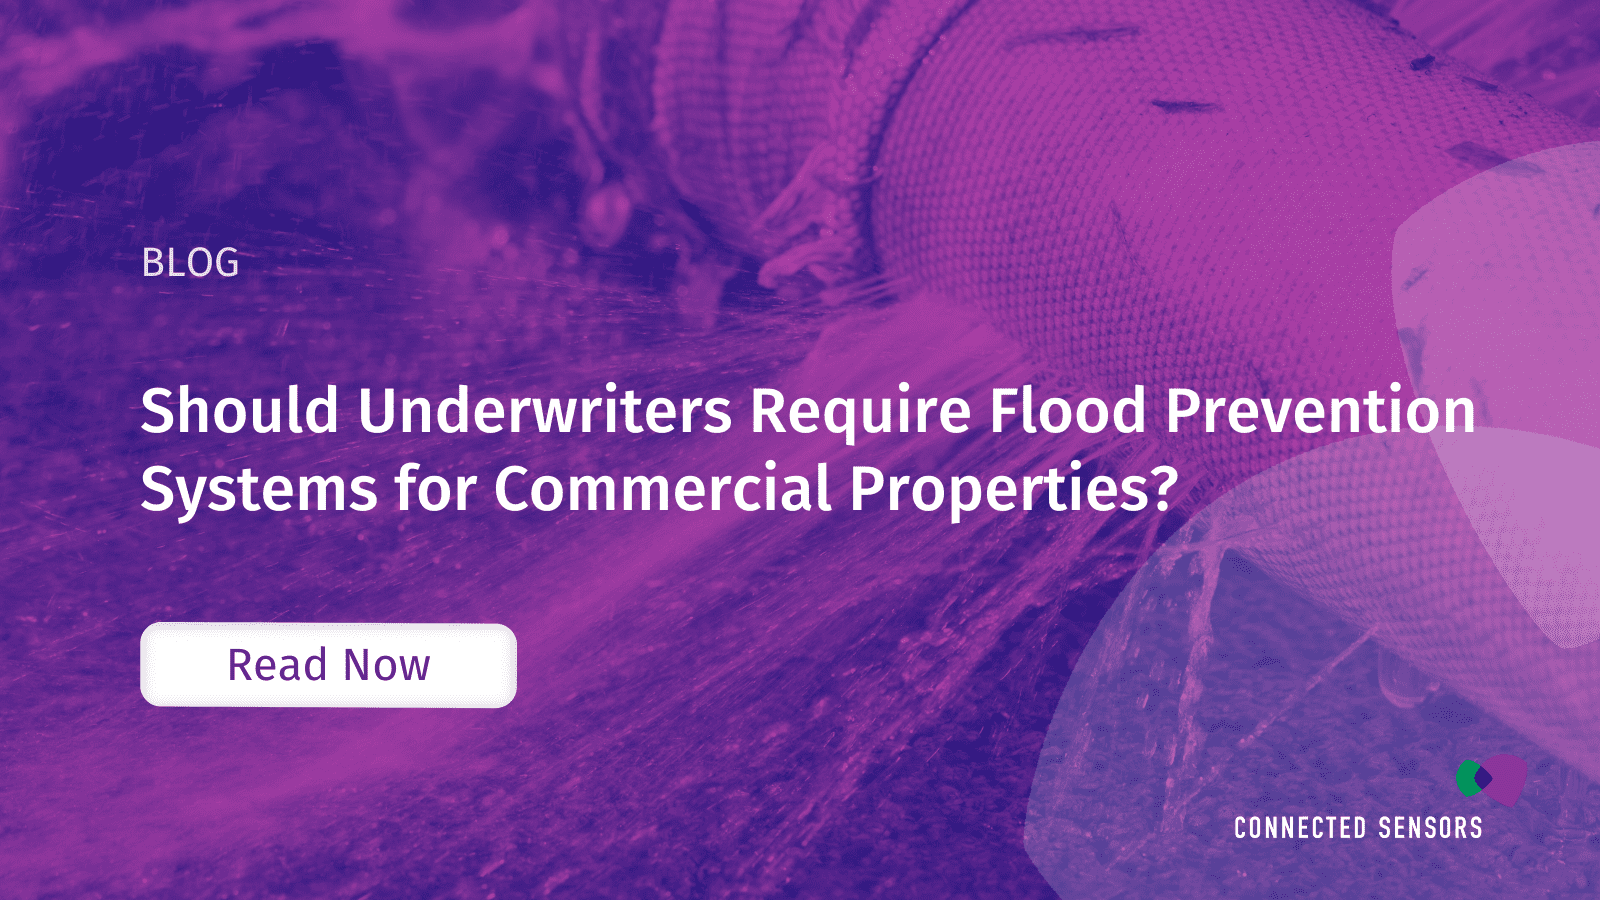 Should Underwriters Require Flood Prevention Systems for Commercial Properties?